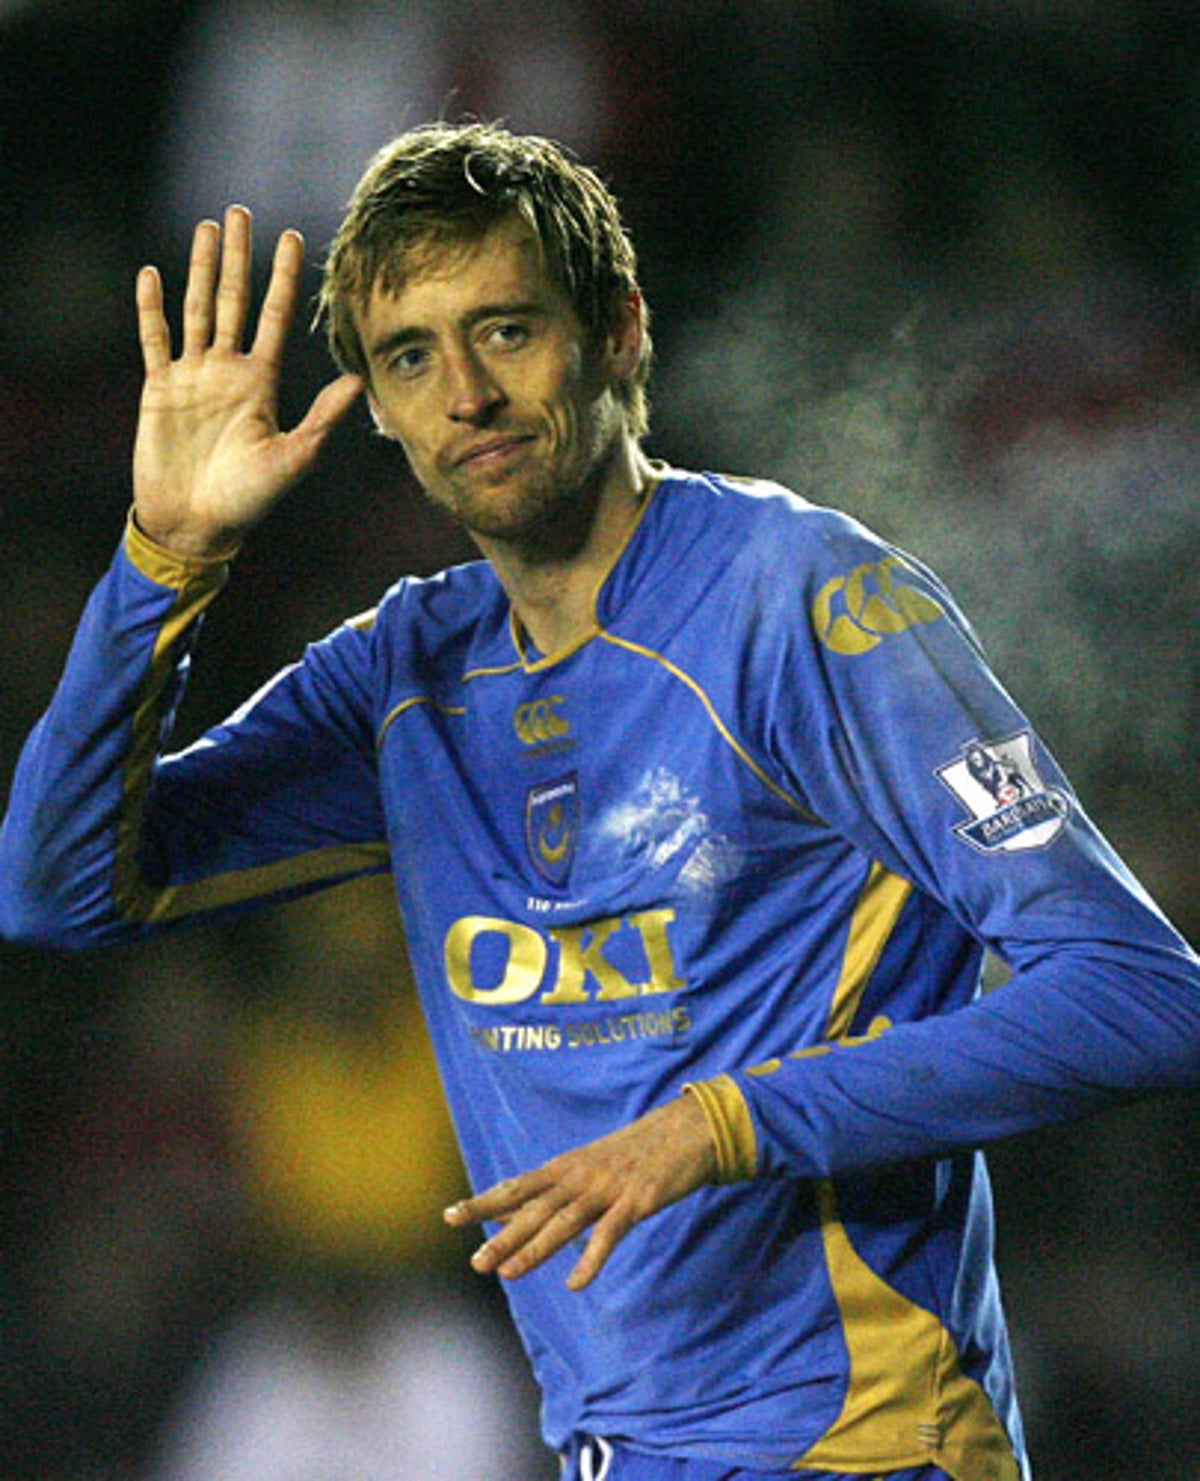 Crouch, Redknapp and 11 more to play for both LFC and Spurs